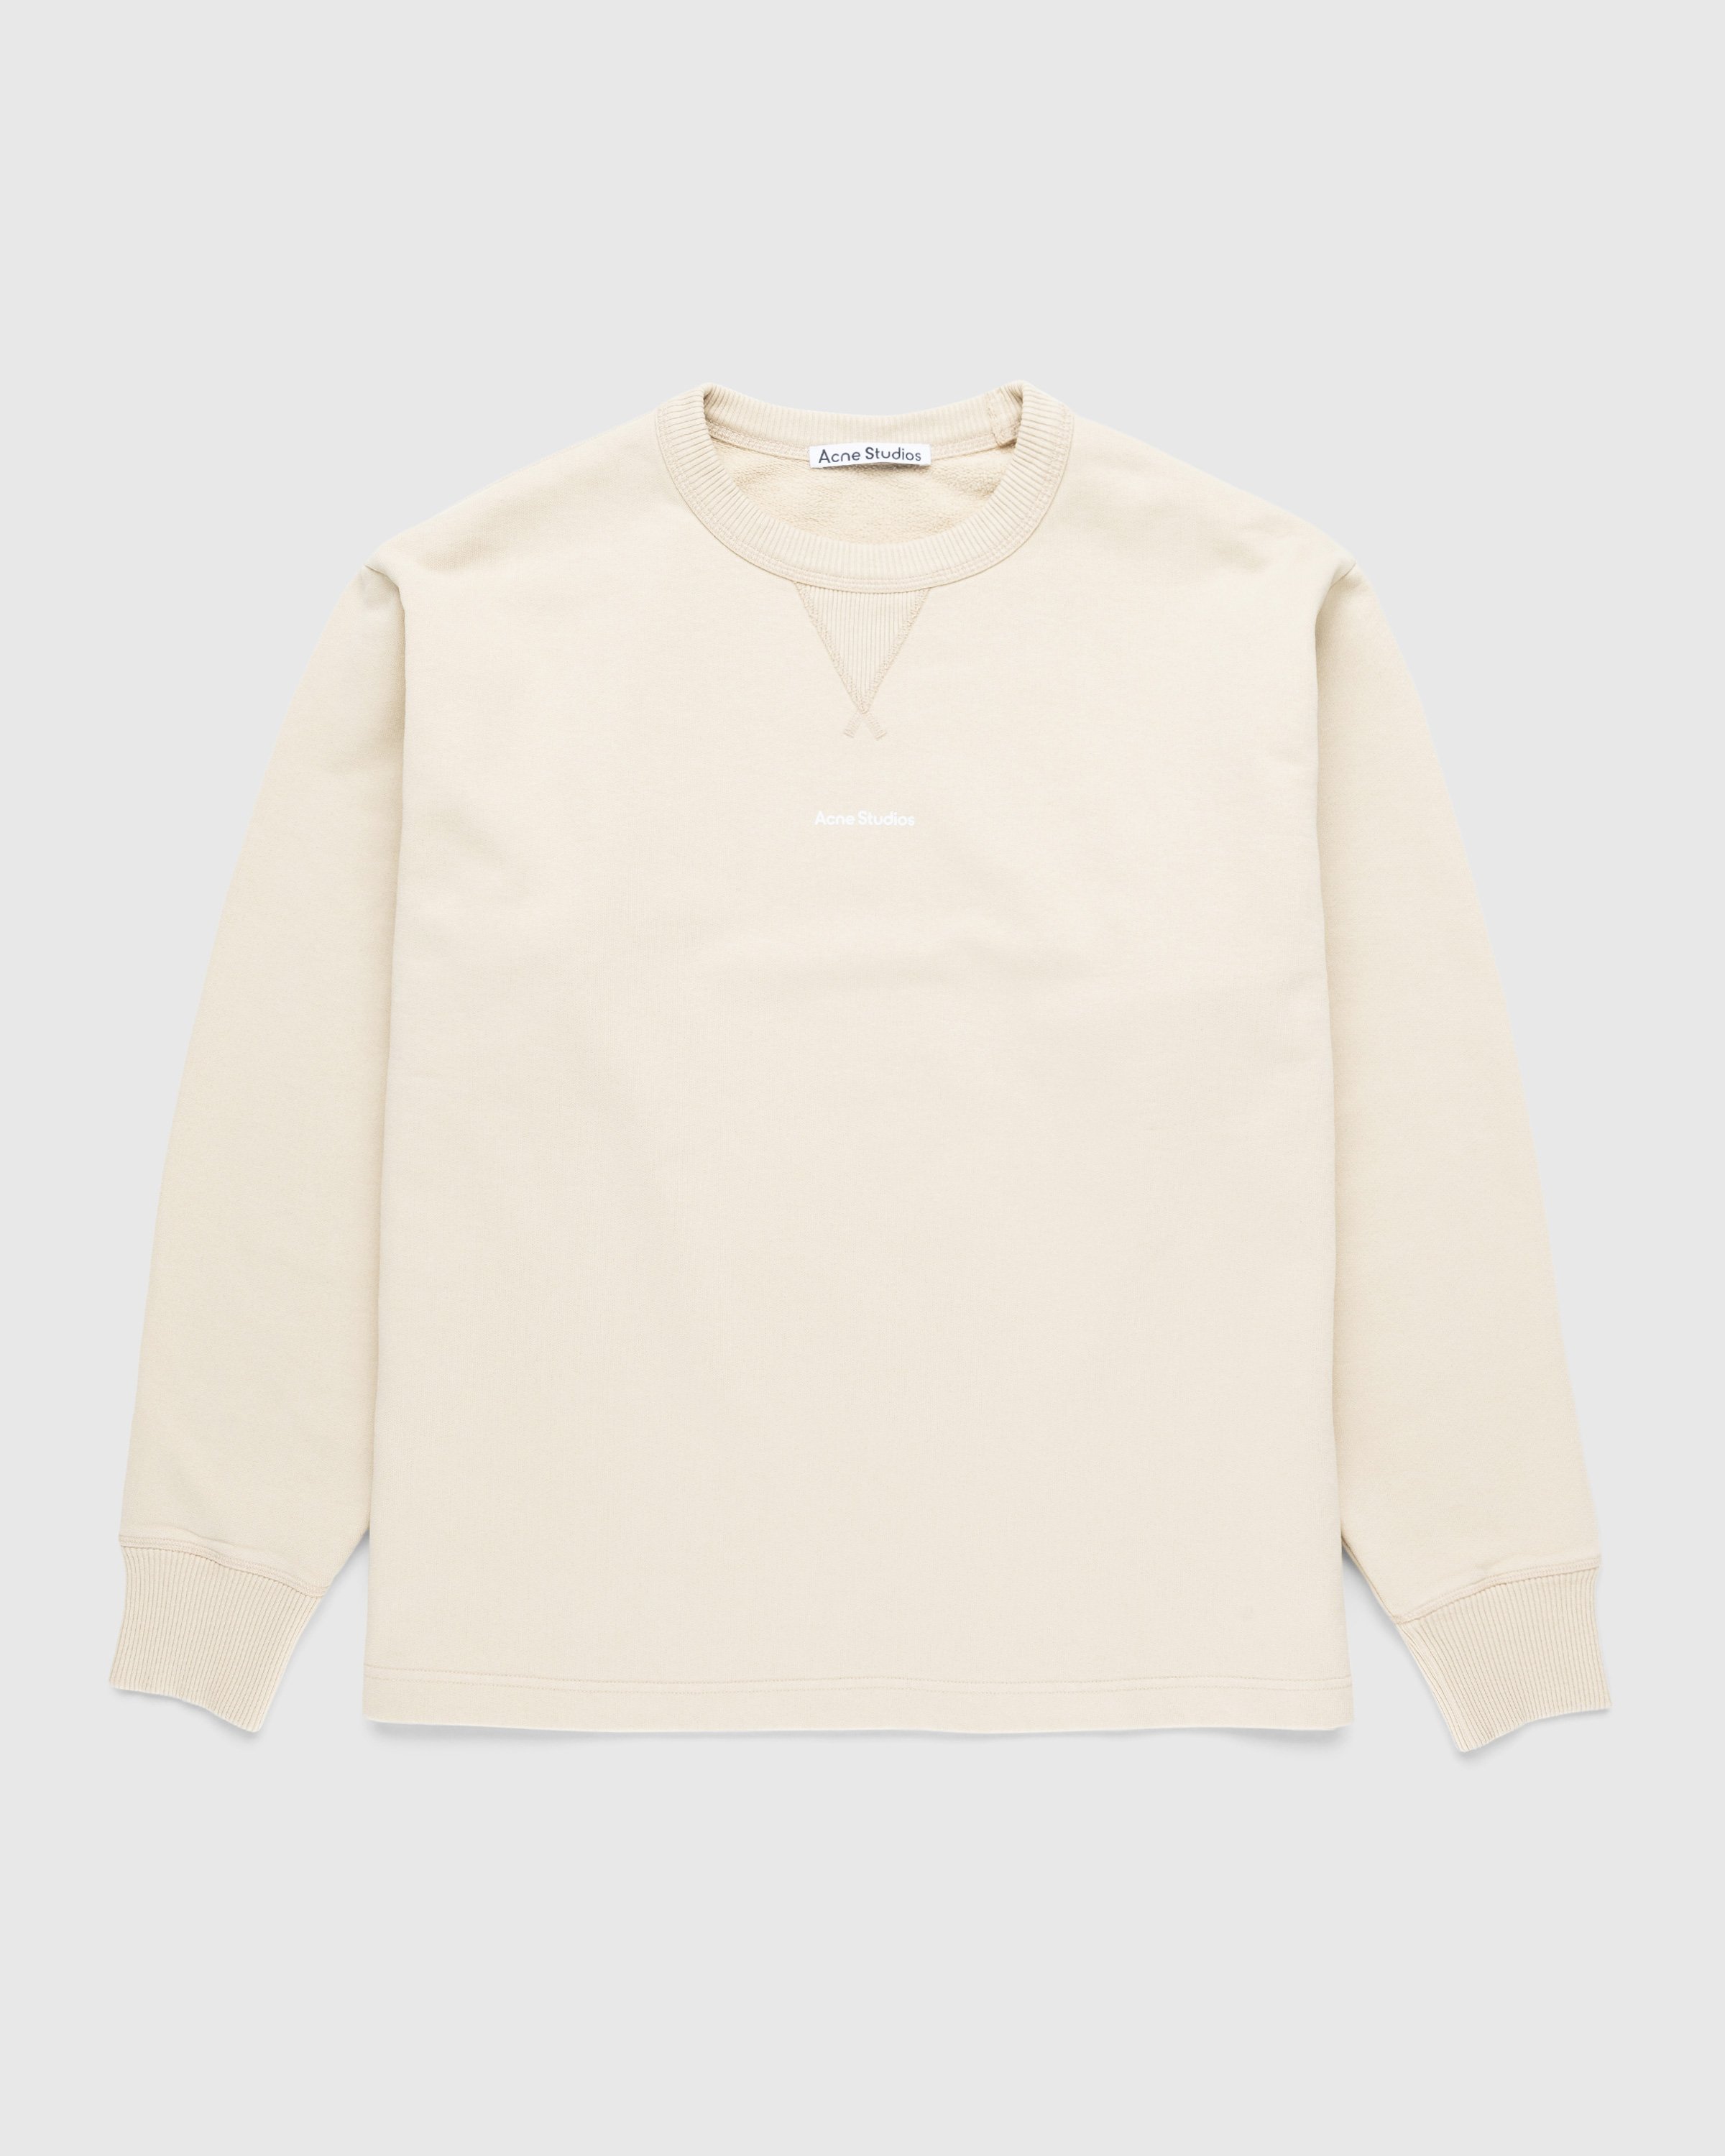 Acne Studios - Stamp Logo Sweater Champagne Beige - Clothing - Beige - Image 1